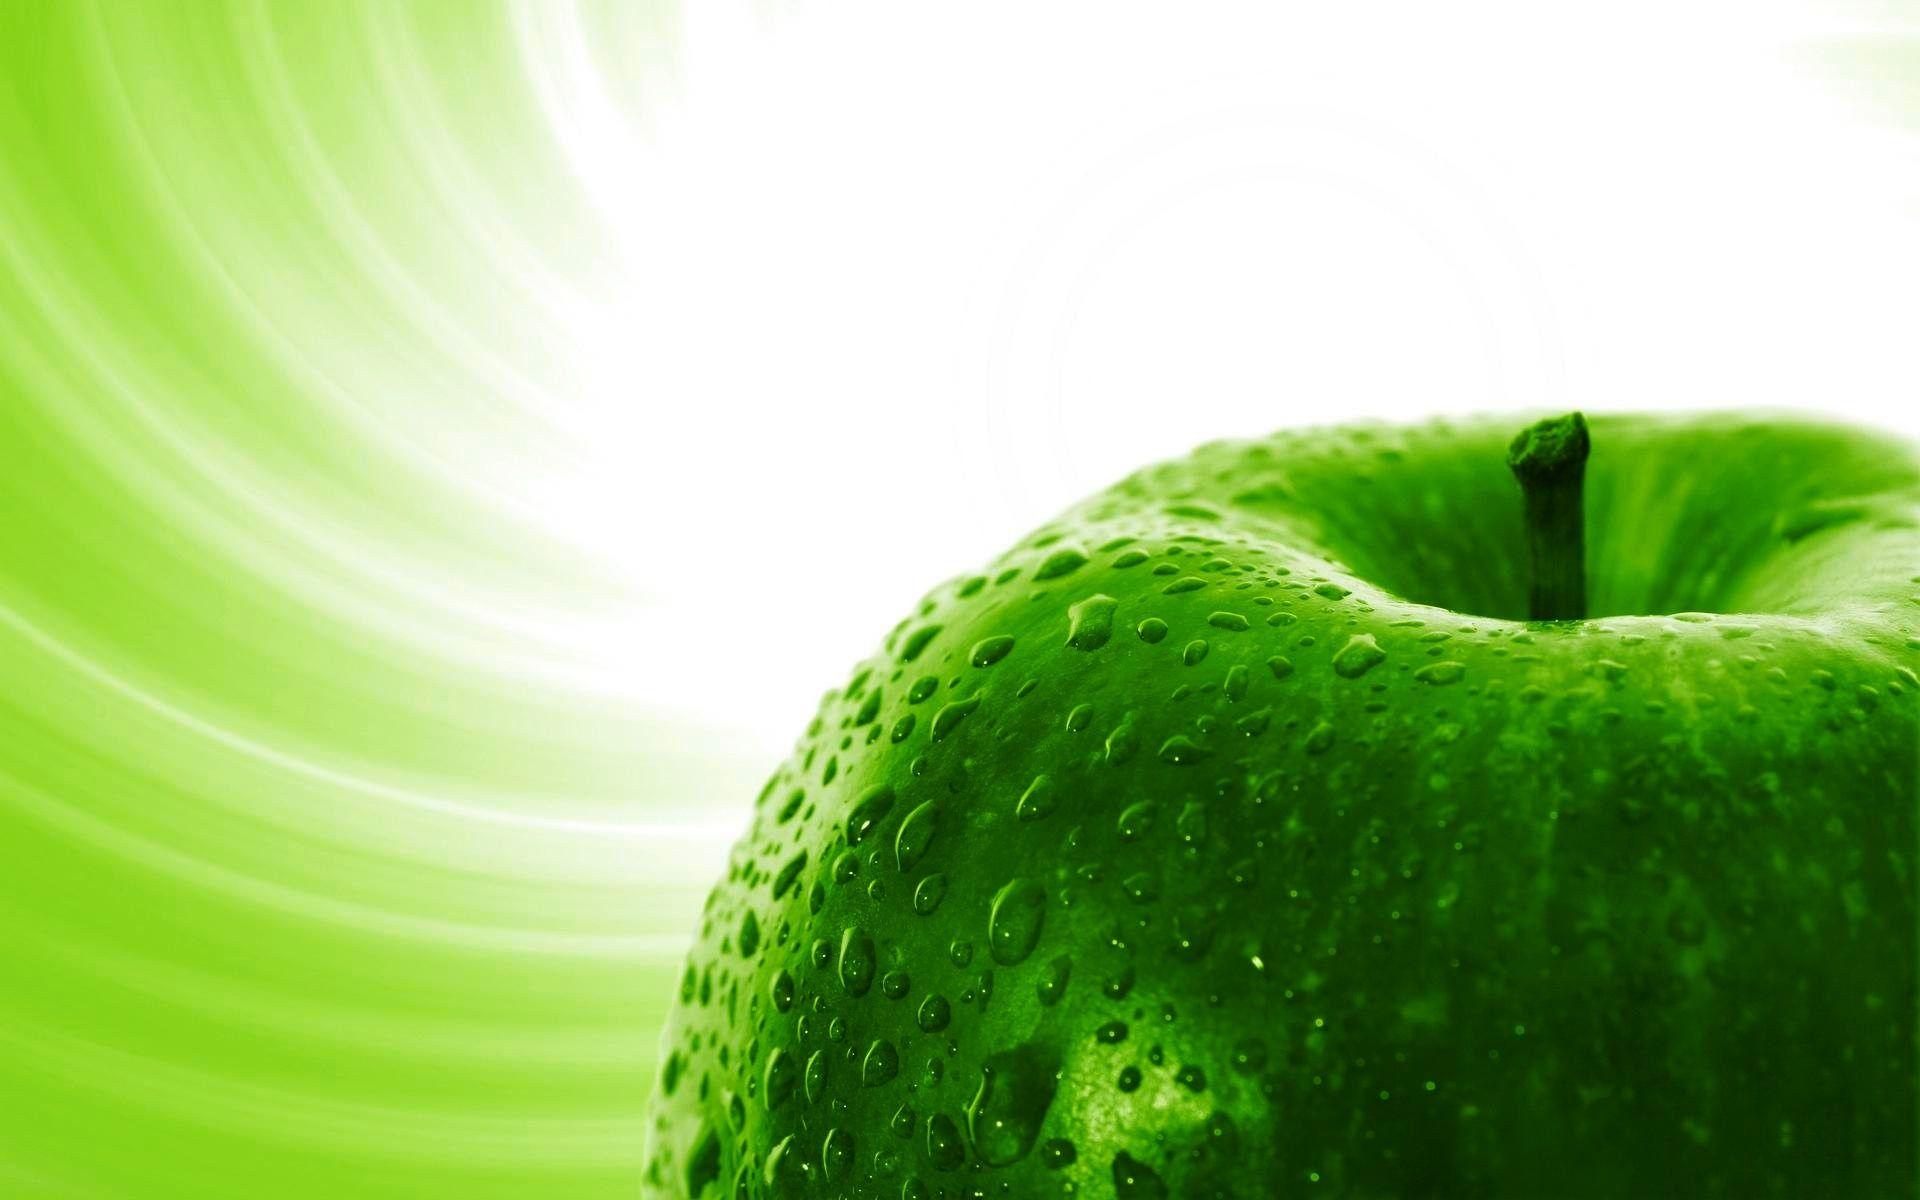 entries in Green Apple Wallpaper group